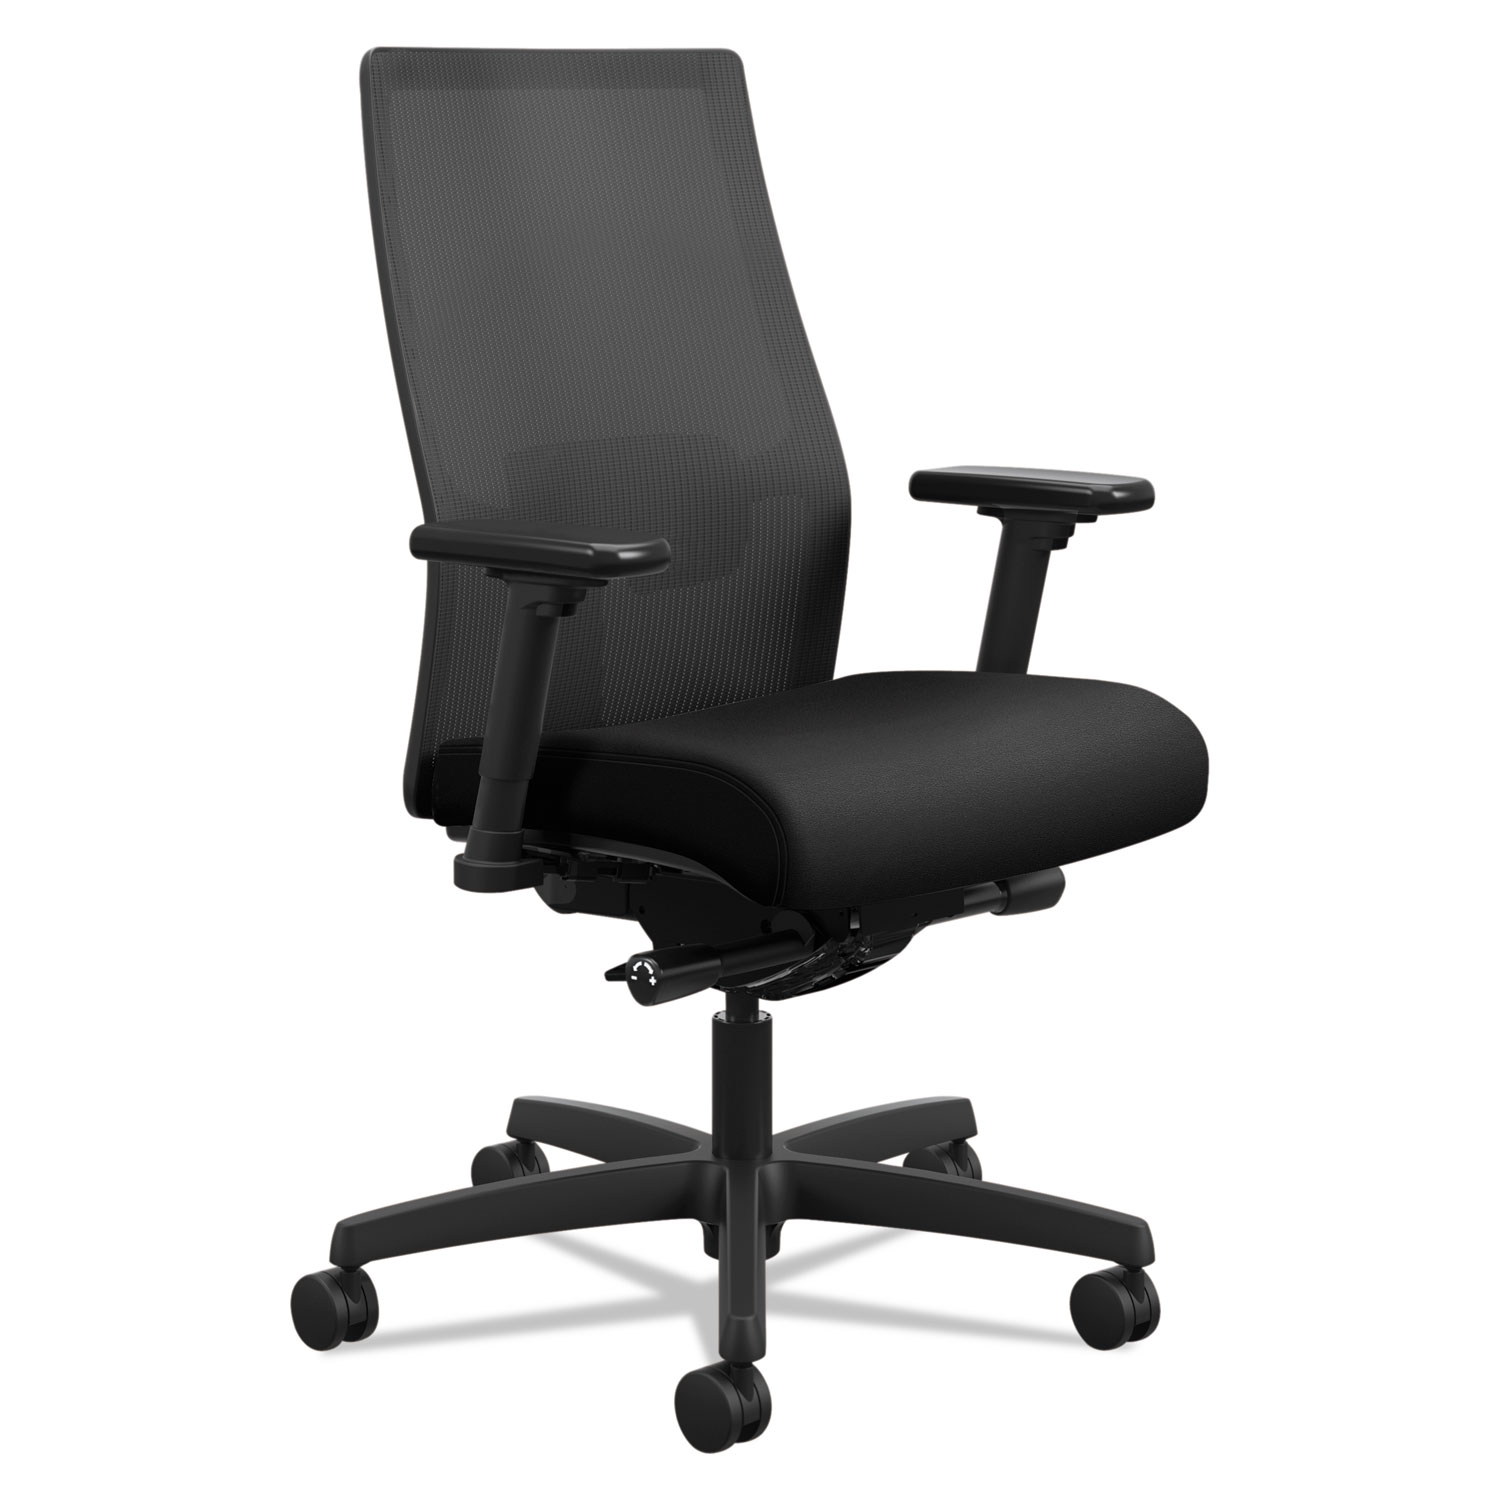  HON HONI2M2AMLC10TK Ignition 2.0 4-Way Stretch Mid-Back Mesh Task Chair, Supports up to 300 lbs., Black Seat/Back, Black Base (HONI2M2AMLC10TK) 